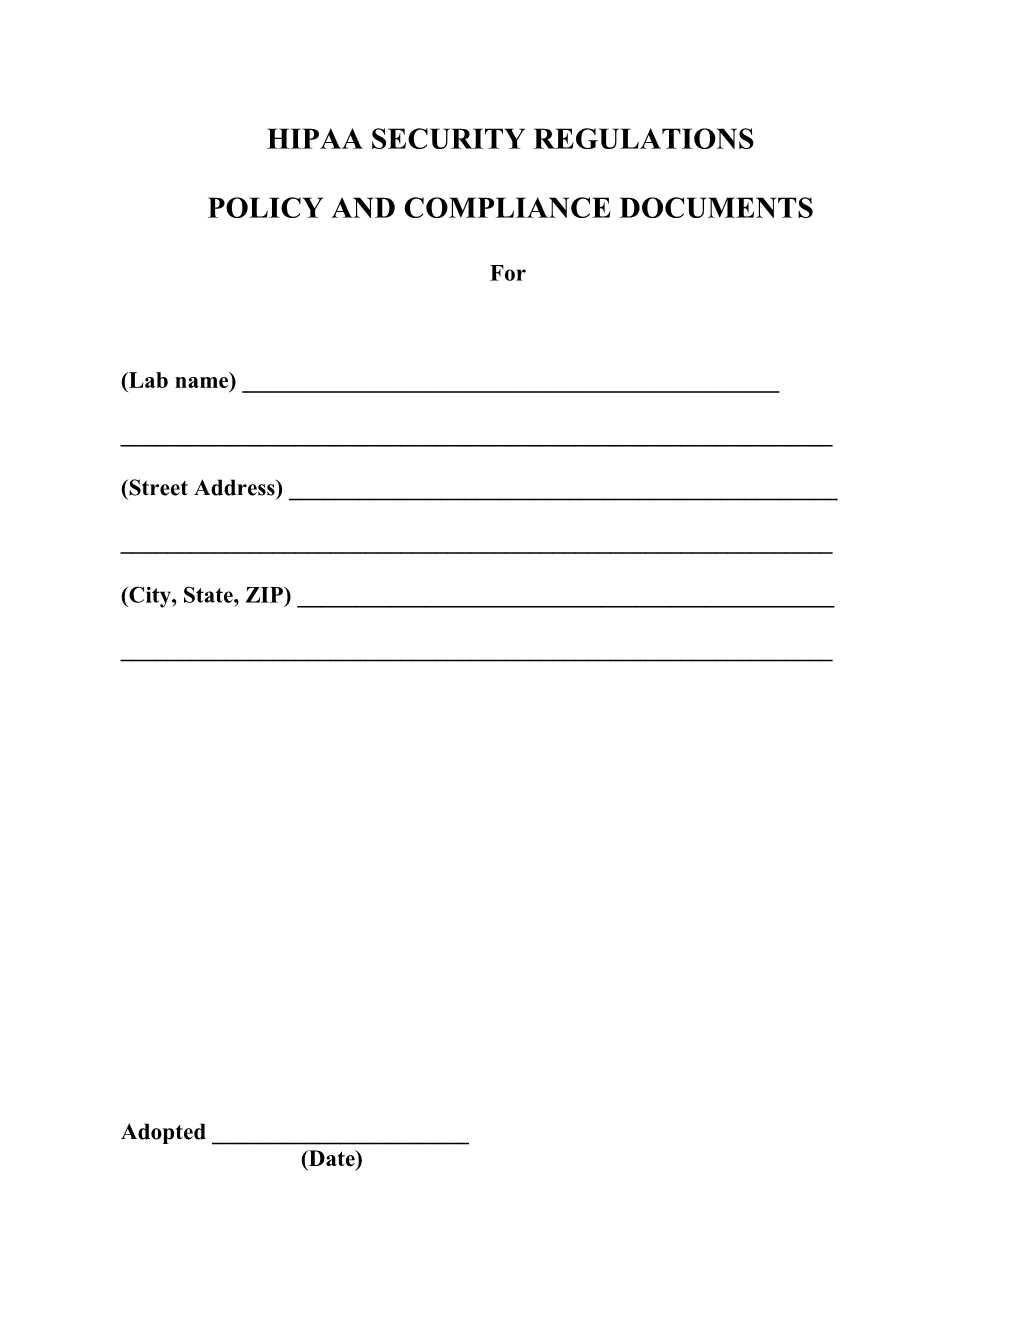 Policy and Compliance Documents